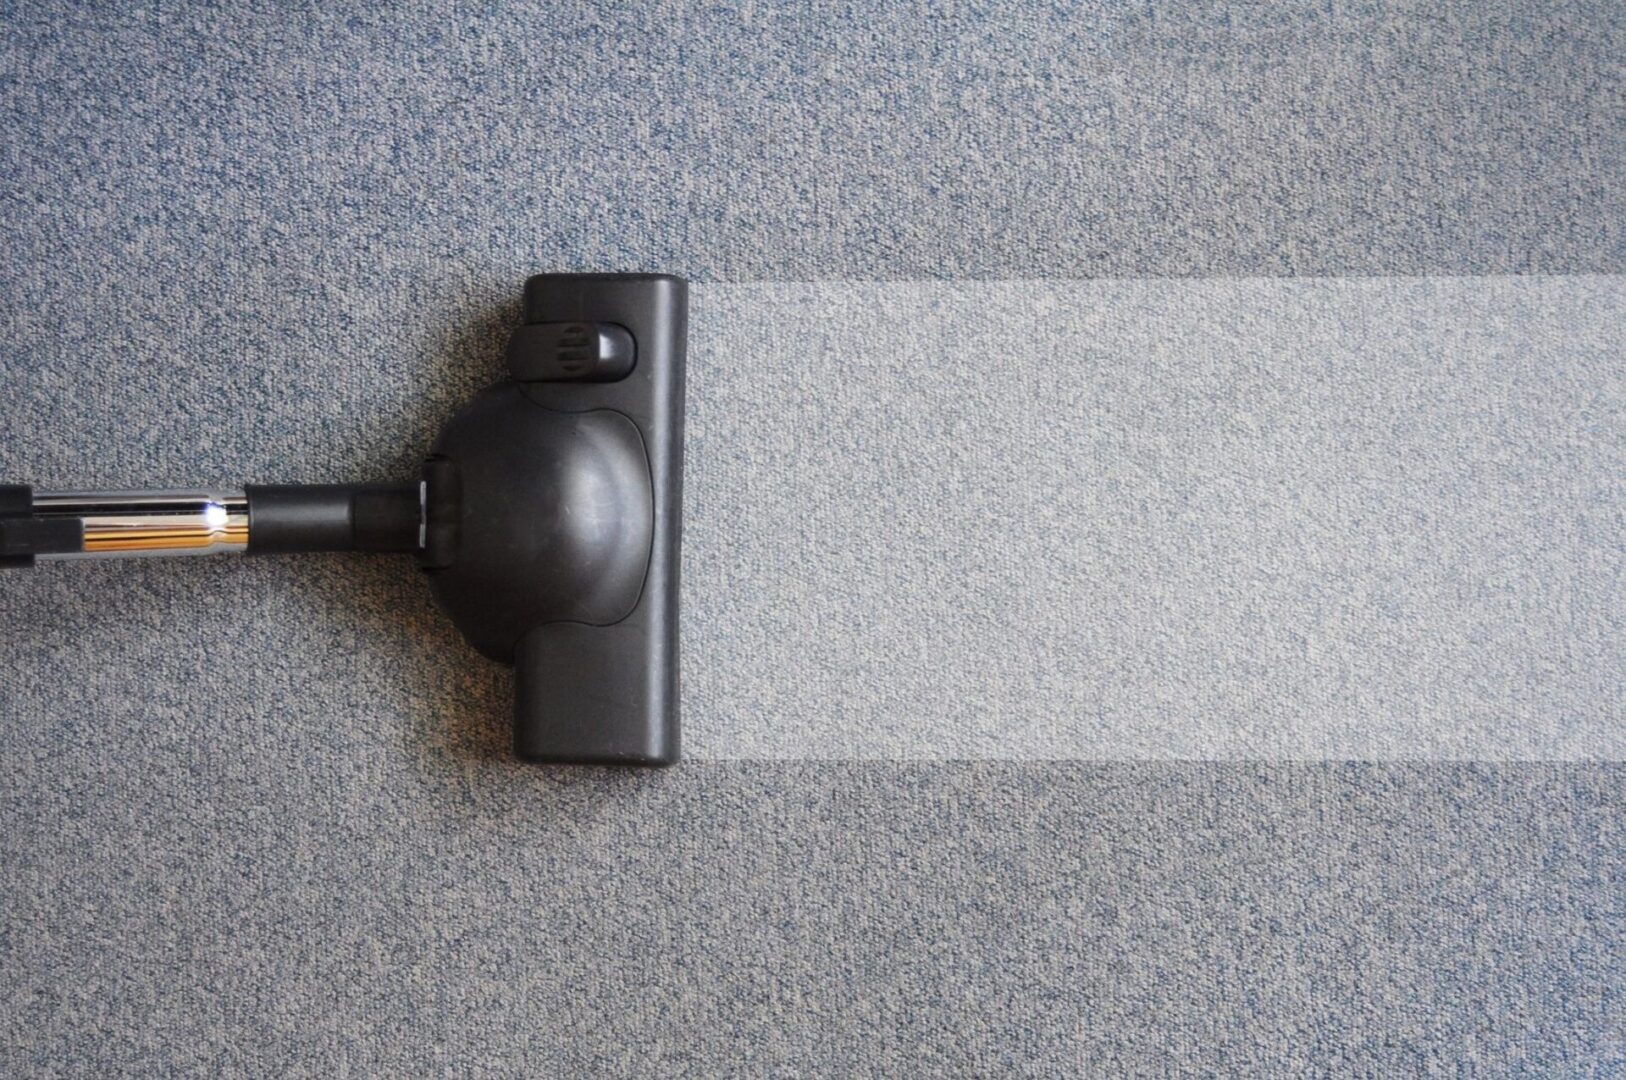 A vacuum cleaner is on the floor with its head down.